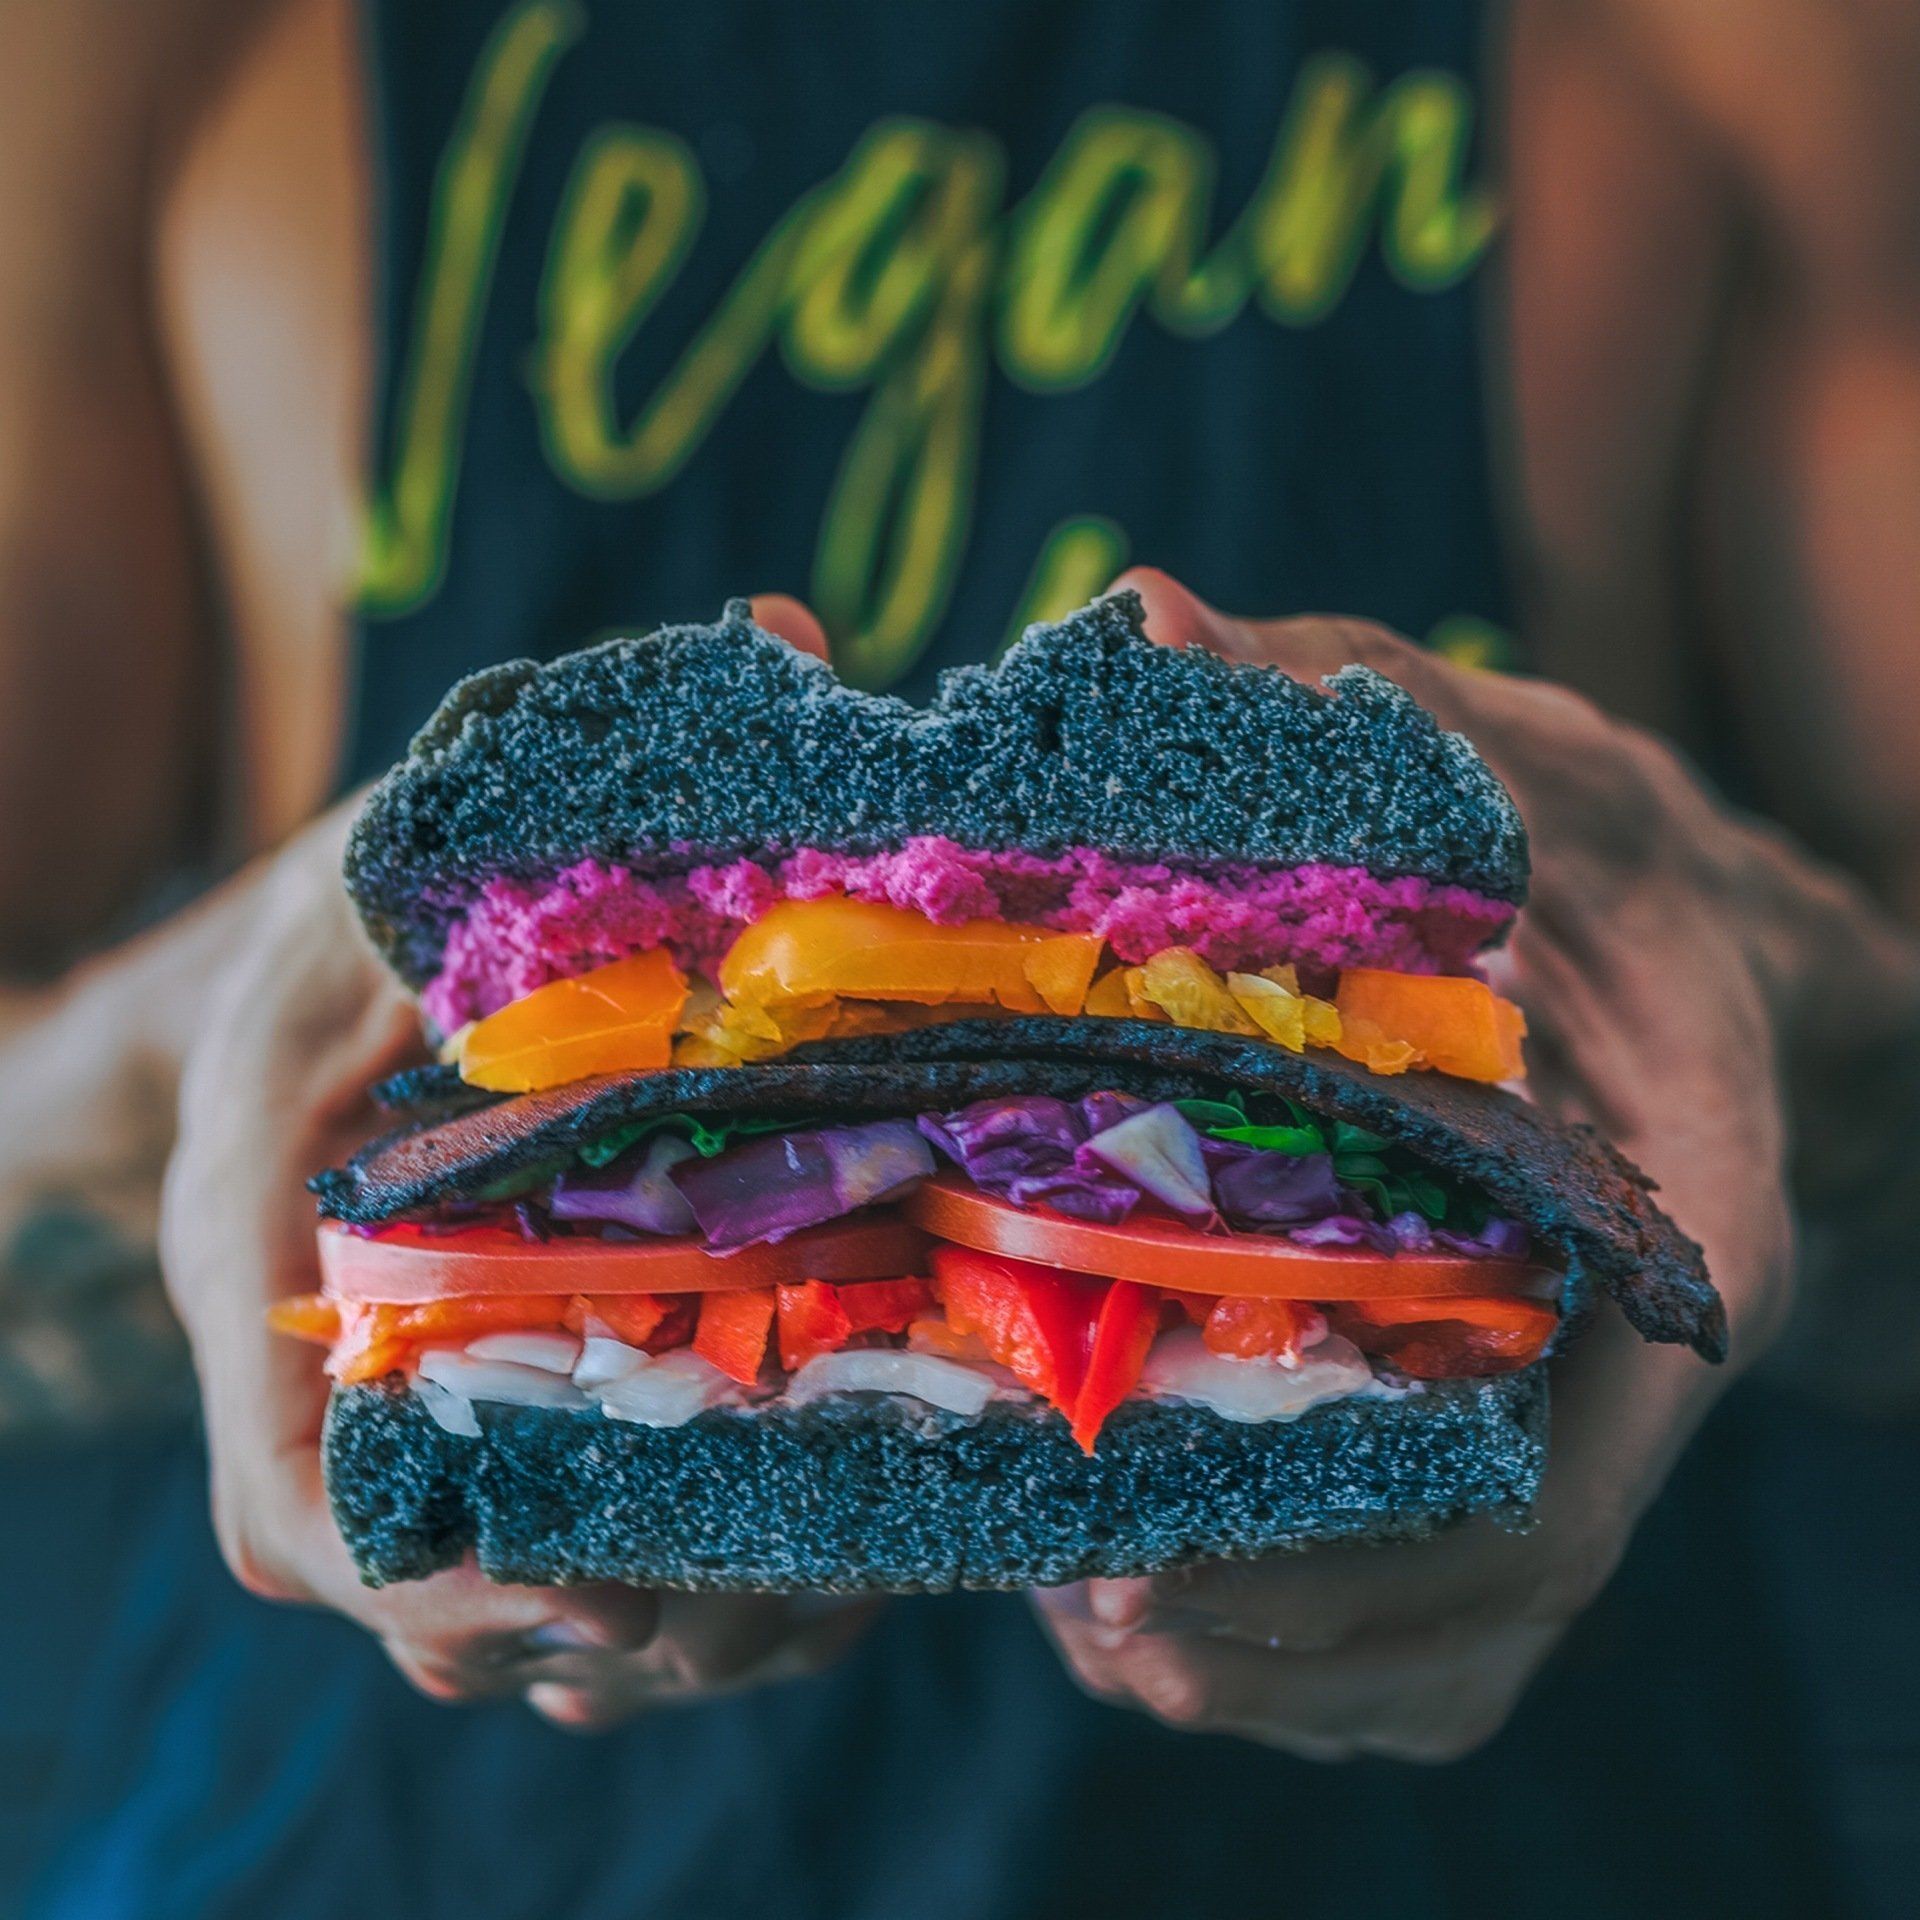 A Vegan holding a sandwich that is Beautiful Colorful and Vegan Friendly